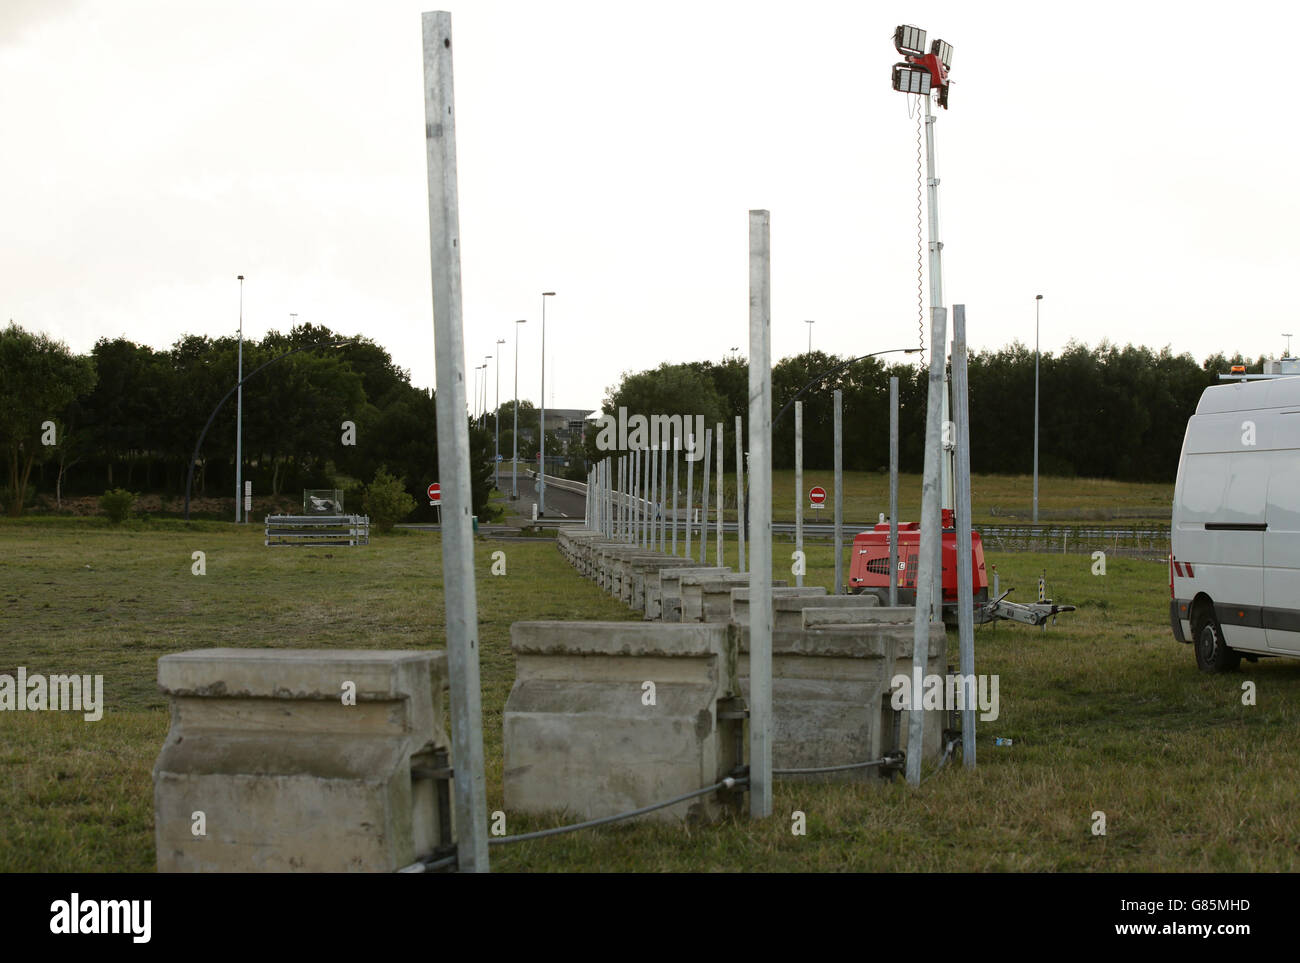 The foundations for a new section of fence to reinforce security, next to the perimeter fence of the Eurotunnel site at Coquelles in Calais, France. PRESS ASSOCIATION Photo. Picture date: Thursday July 30, 2015. Photo credit should read: Yui Mok/PA Wire Stock Photo